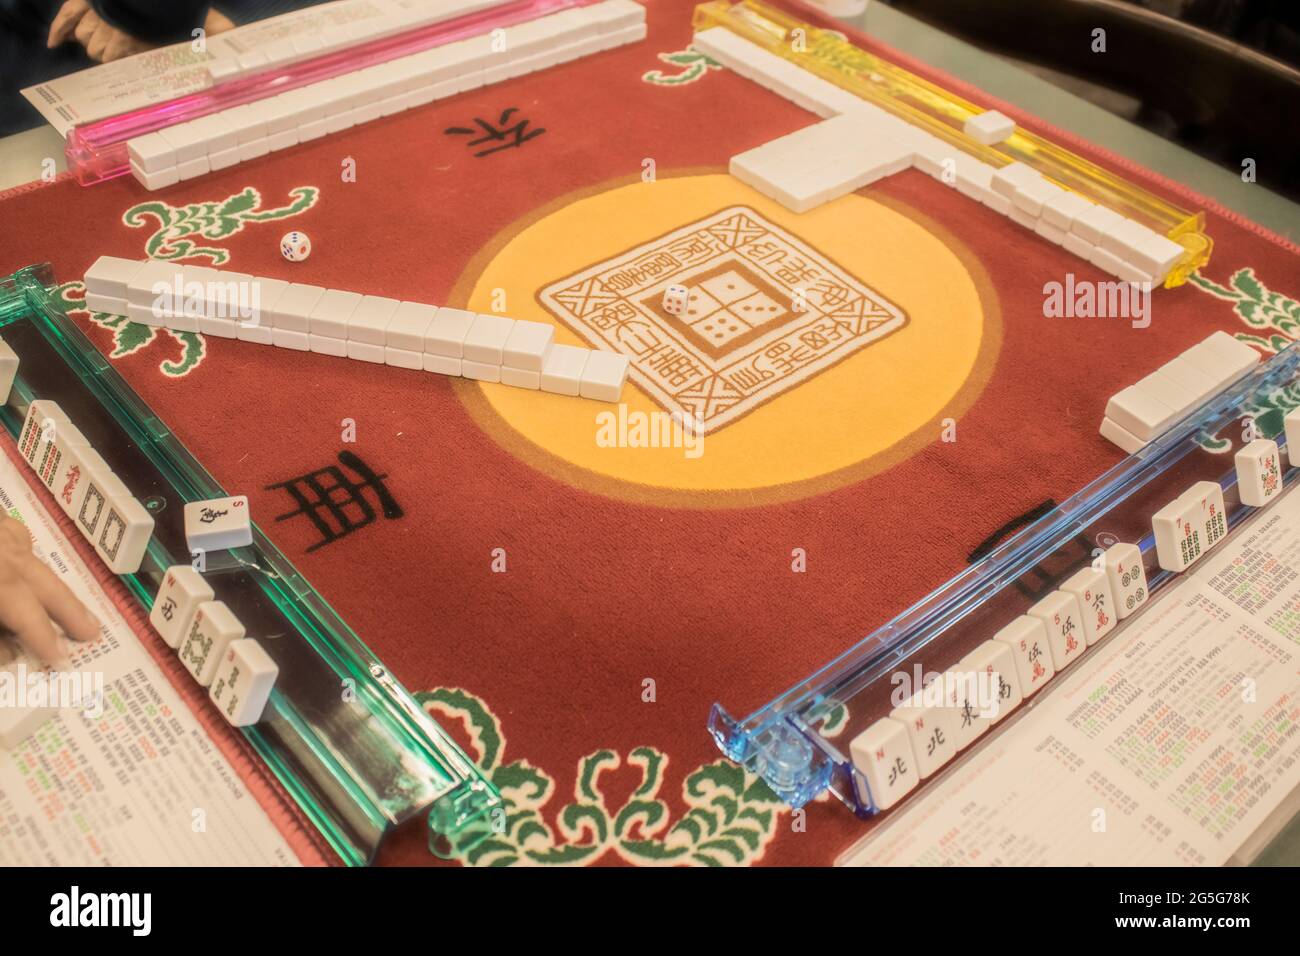 Table where Mahjong - the Mandarin tile-based game - is being played on a colorful mahjong mat with a dice in the middle - selective focus Stock Photo